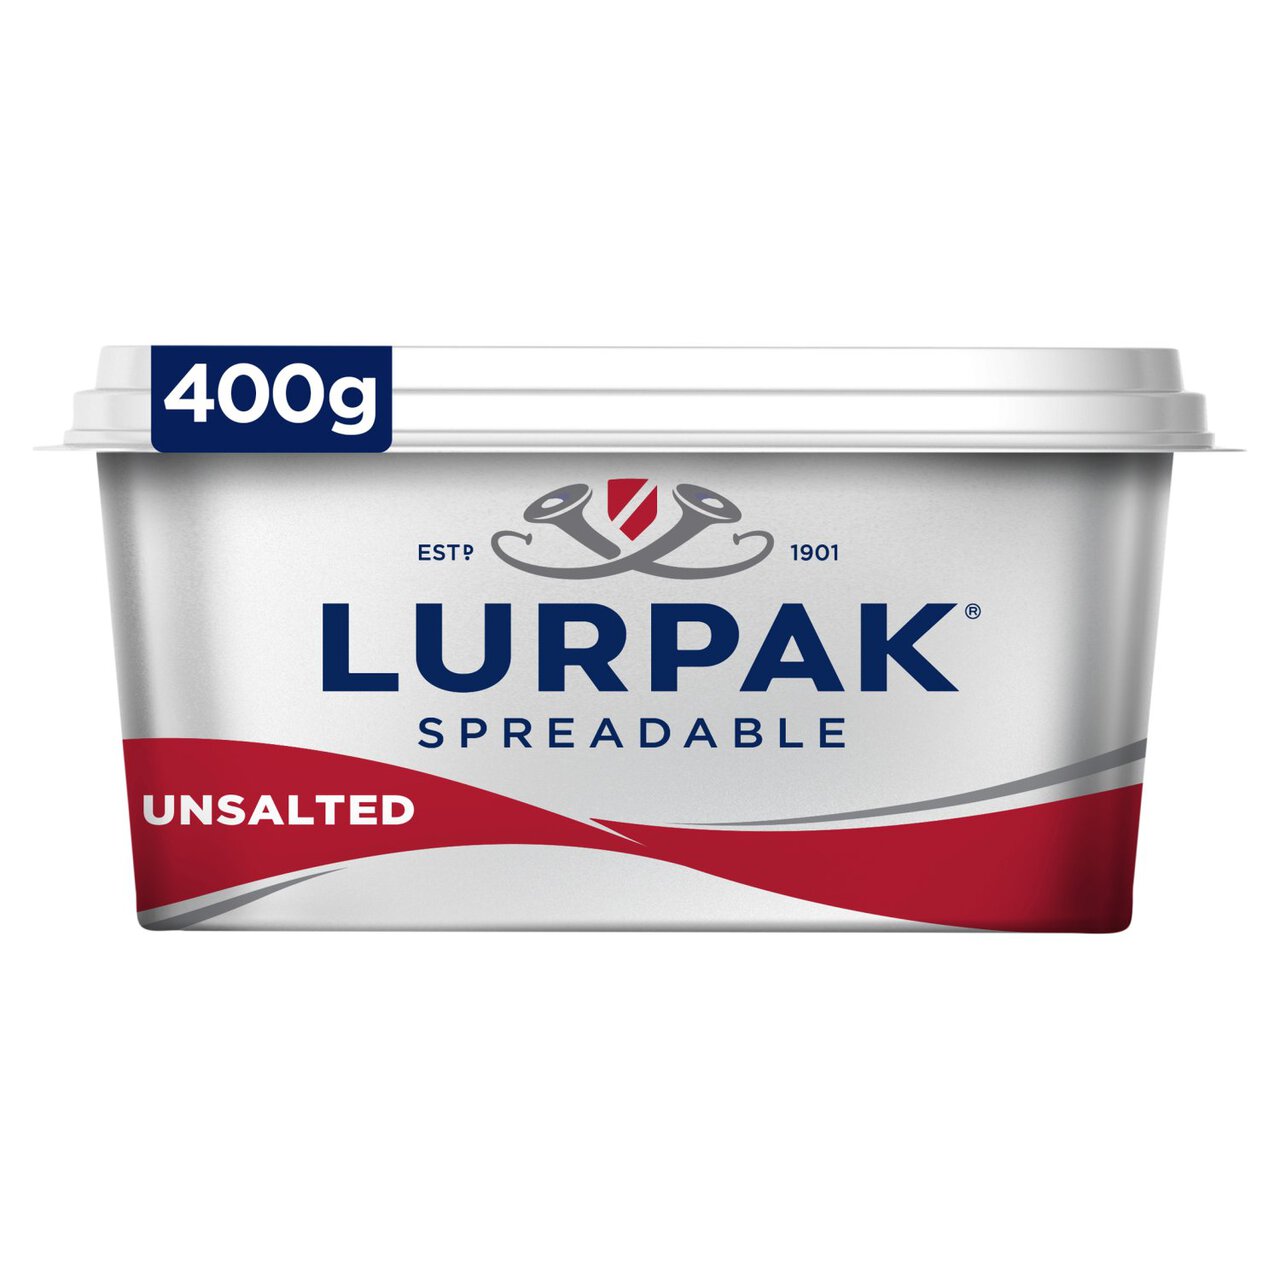 Lurpak Unsalted Spreadable Blend of Butter and Rapeseed Oil 400g